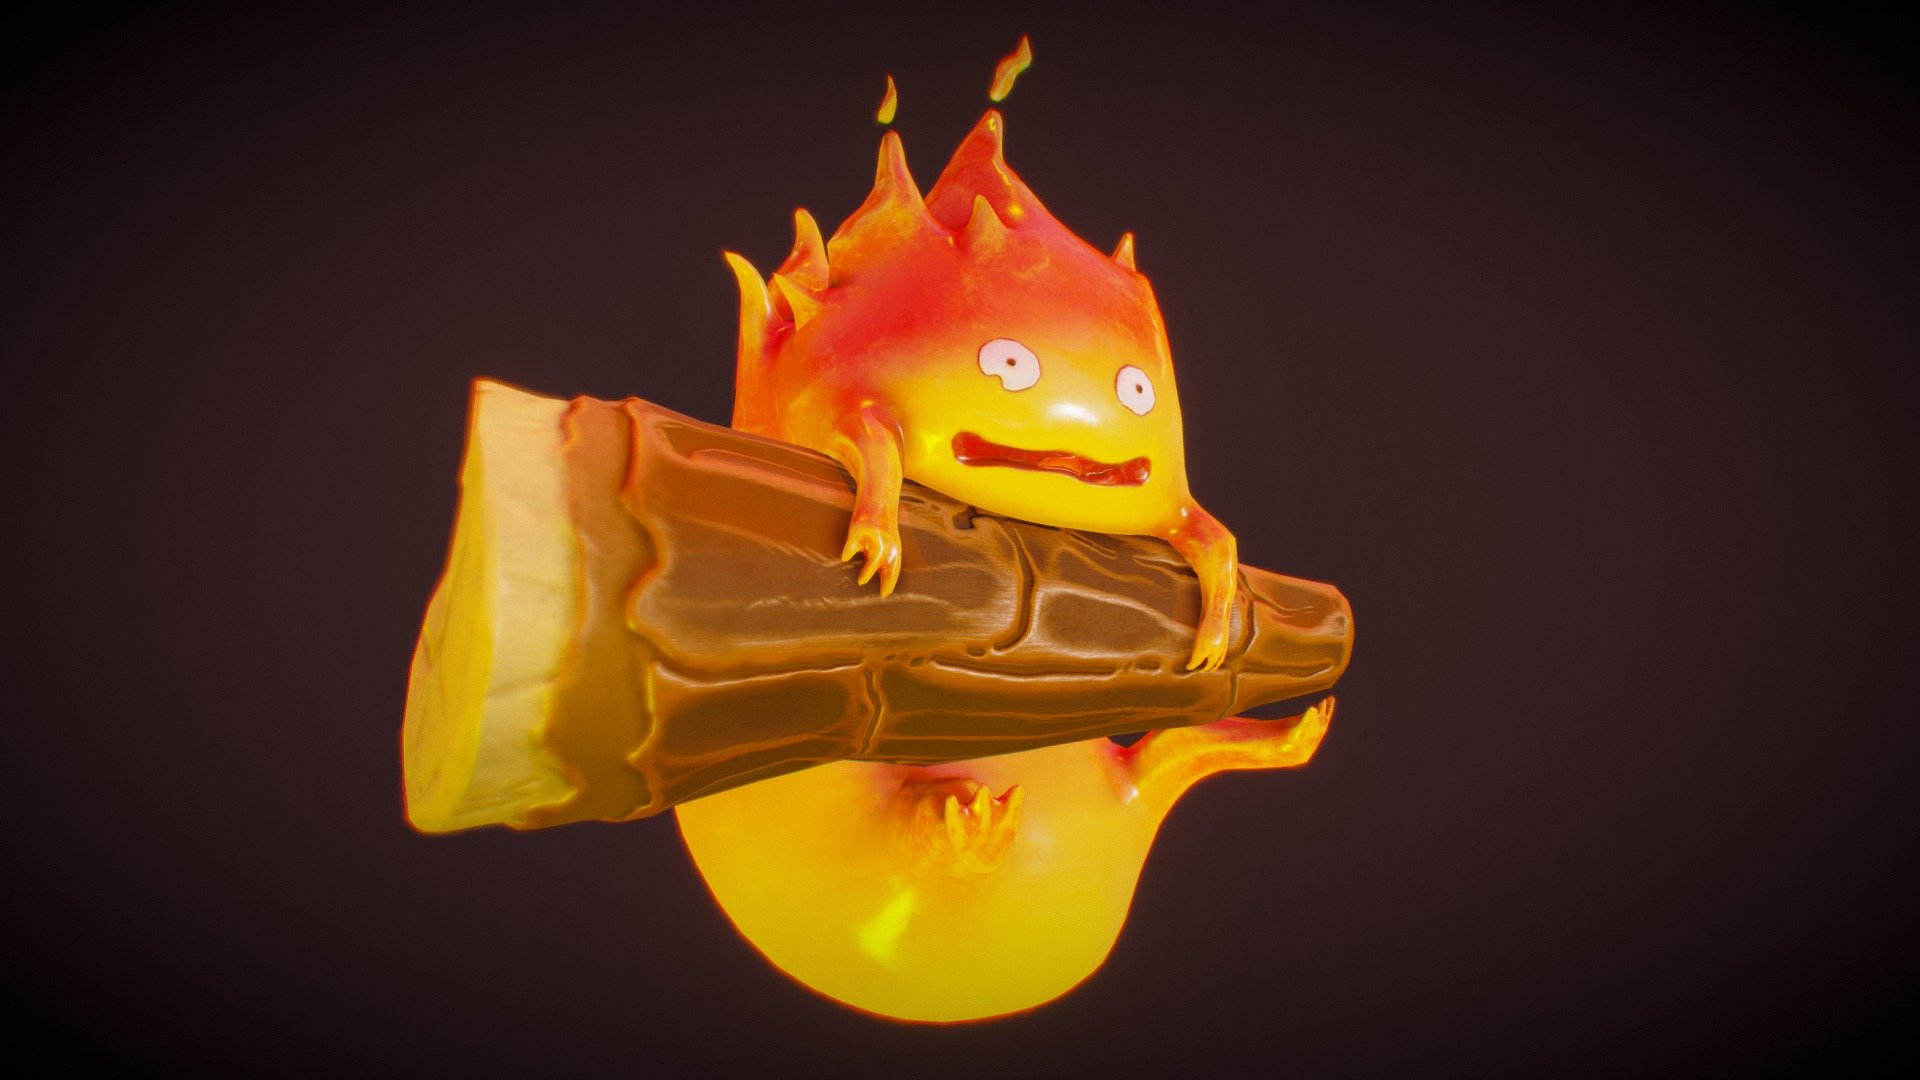 Just a little fanart of Calcifer from Studio Ghibli
Softwares:
· 3D Coat (sculpting, retopo, uvs)
· Substance Painter (texture)

If you want to see more works:
Portfolio website: http://cmartin3d.com/
Artstation: https://www.artstation.com/cmartin3d - Calcifer - Studio Ghibli - 3D model by cmartin3D 3d model